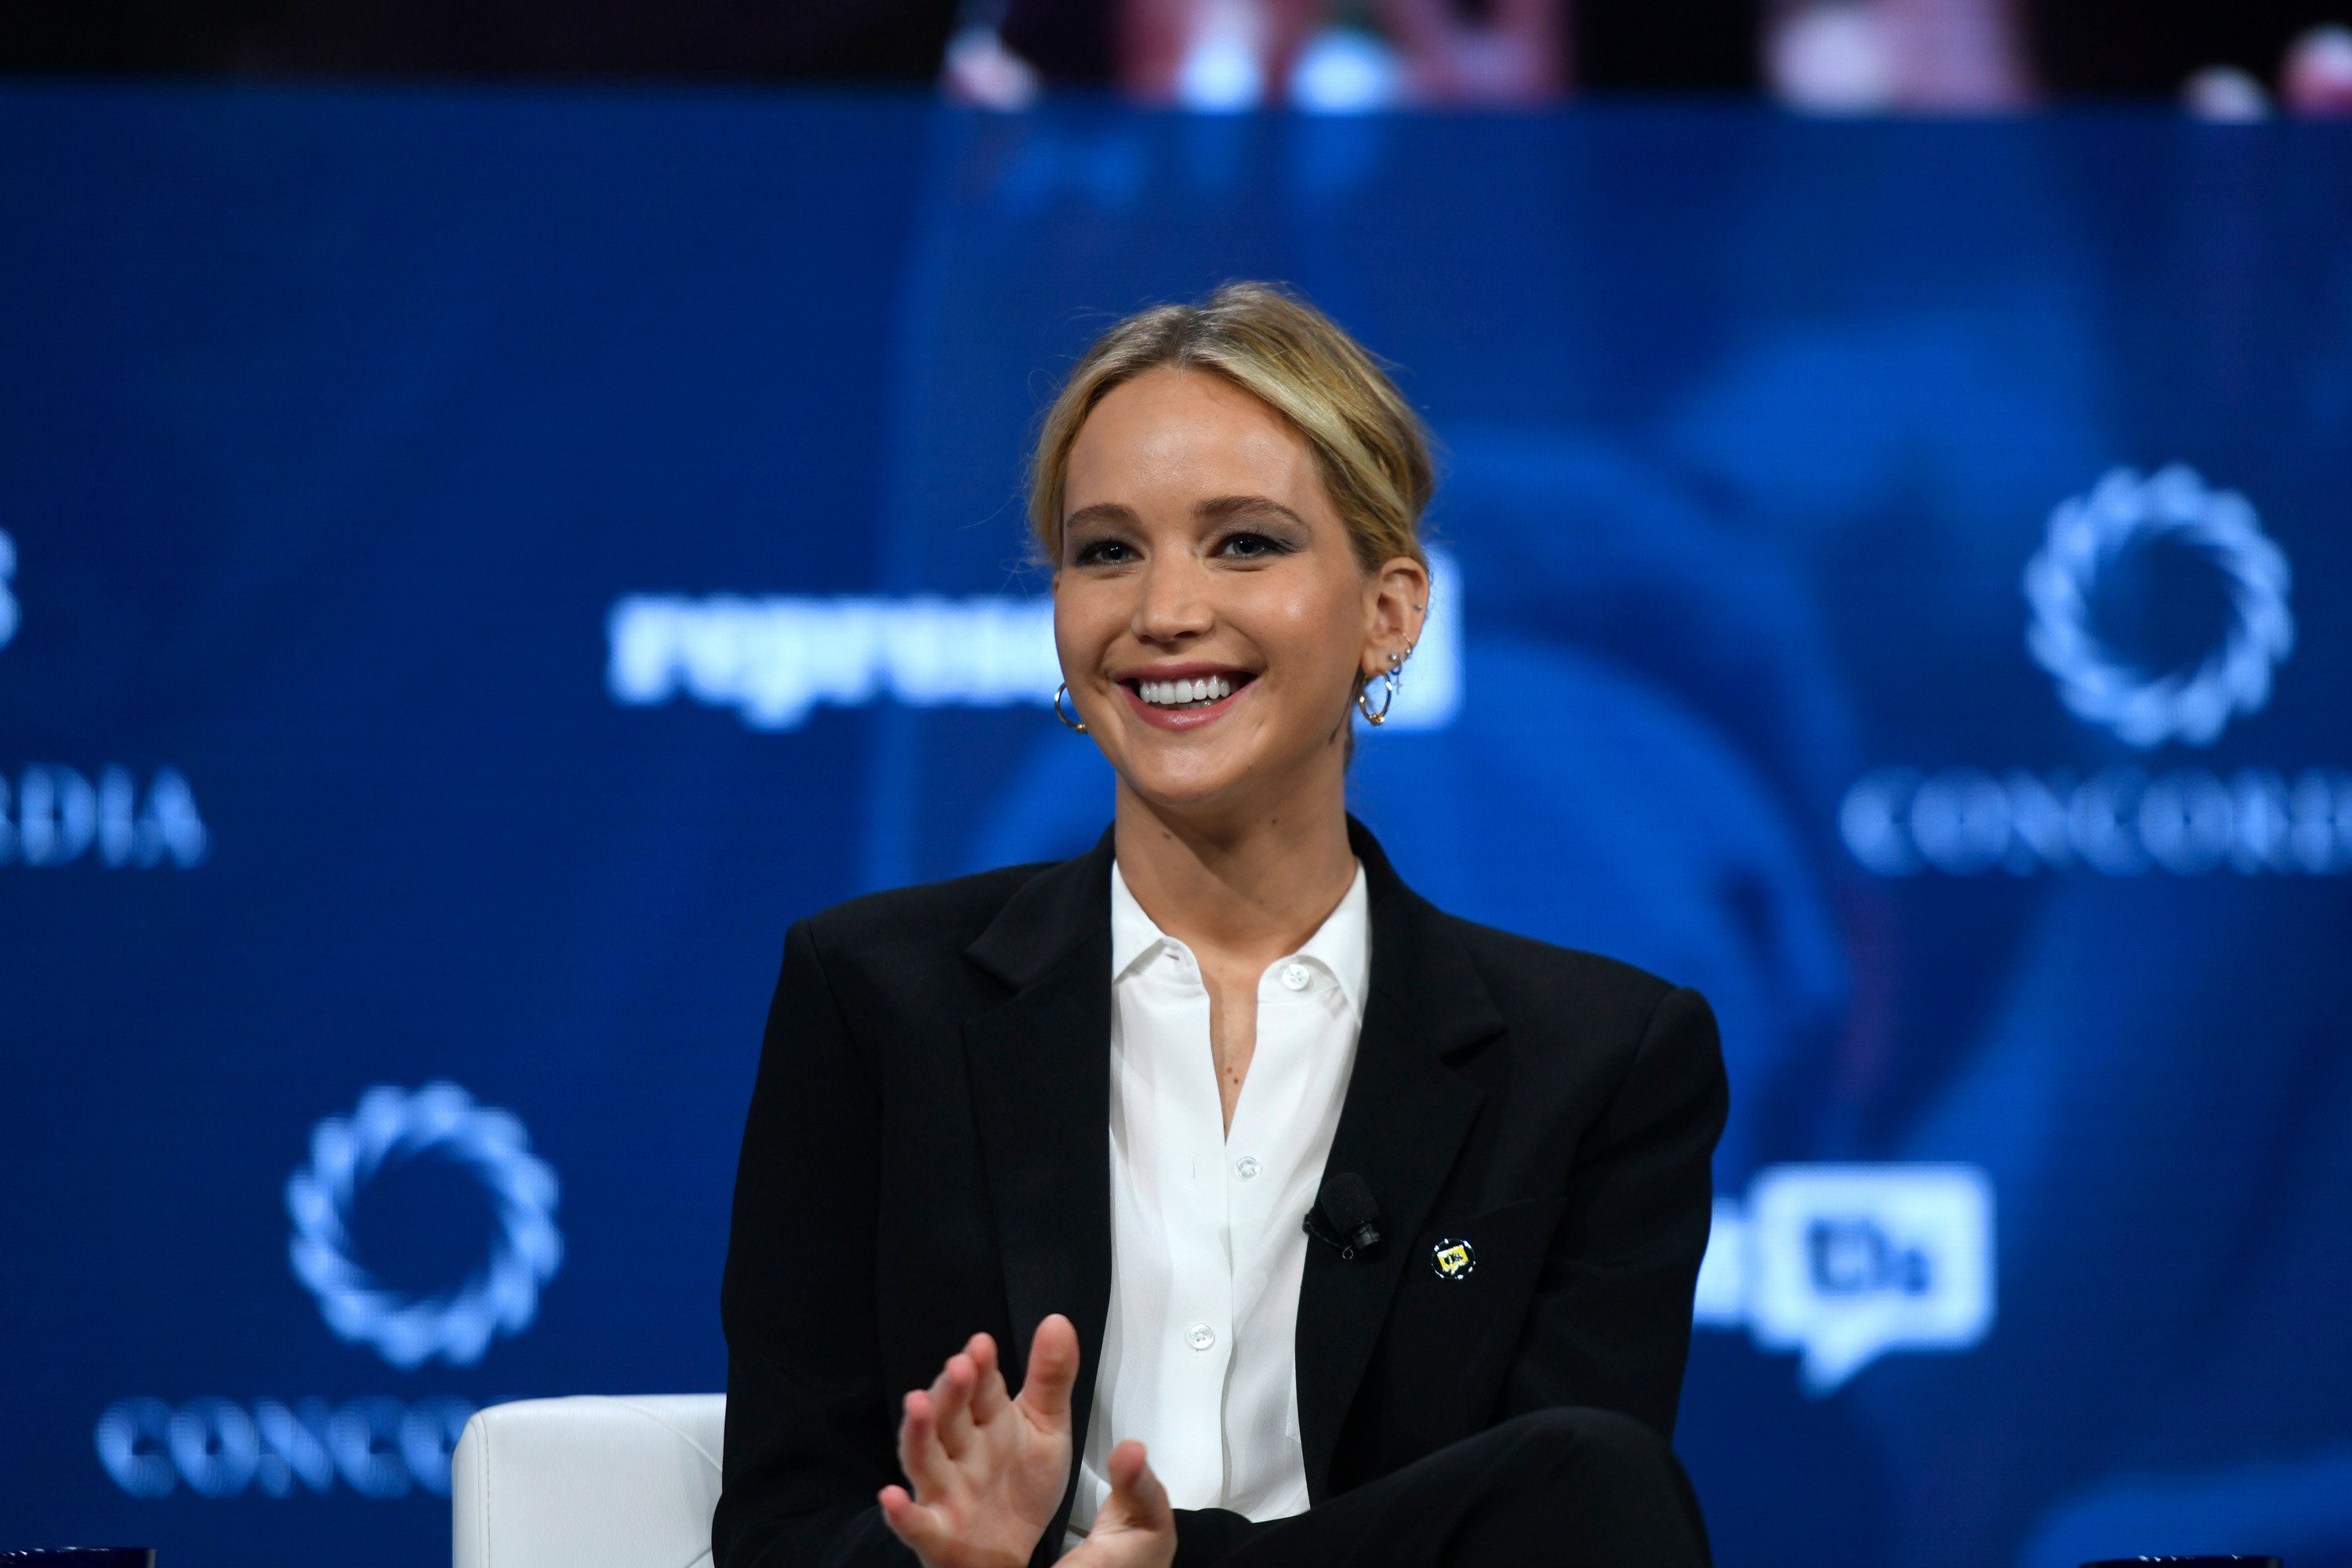 This New Jennifer Lawrence Movie is in a Bidding Tug-of-War